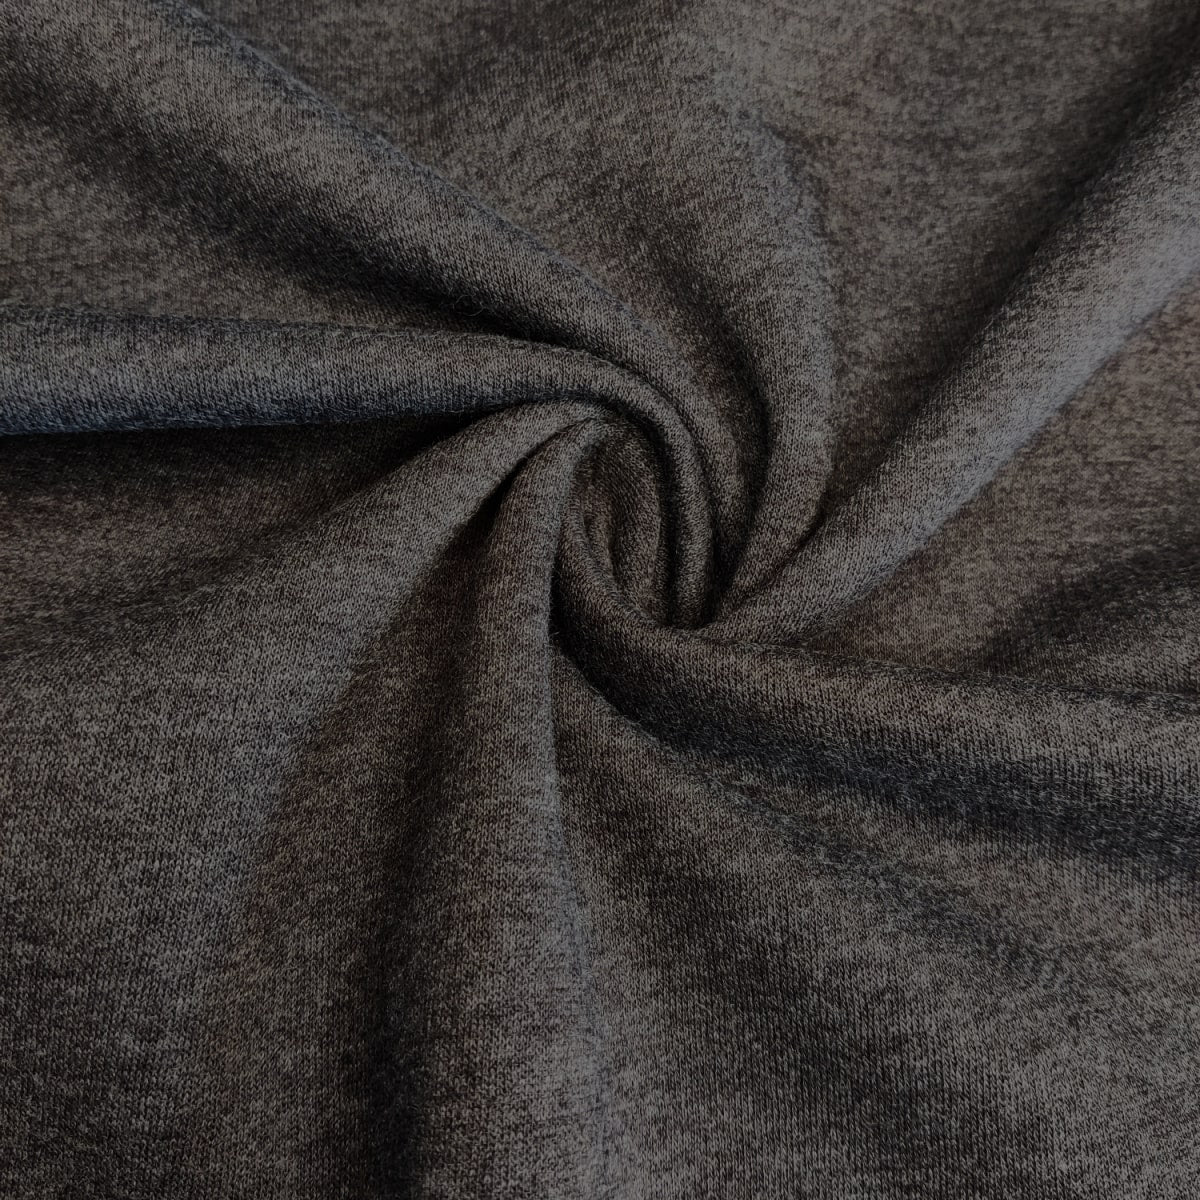 Sweatshirt Fabric | The Classic | Made in Montréal